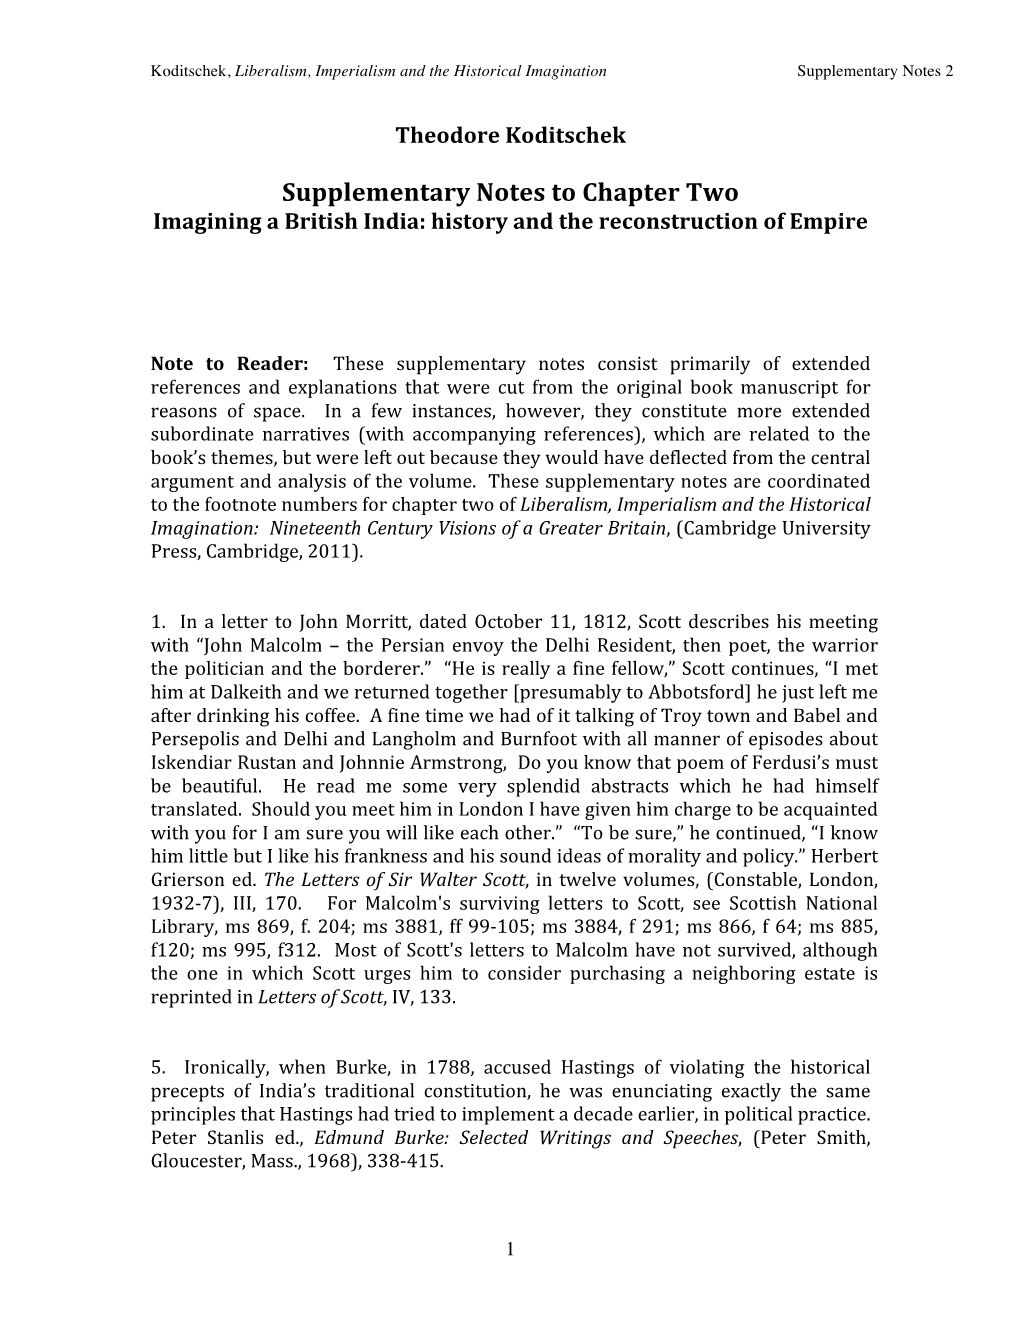 Supplementary Notes to Chapter Two Imagining a British India: History and the Reconstruction of Empire